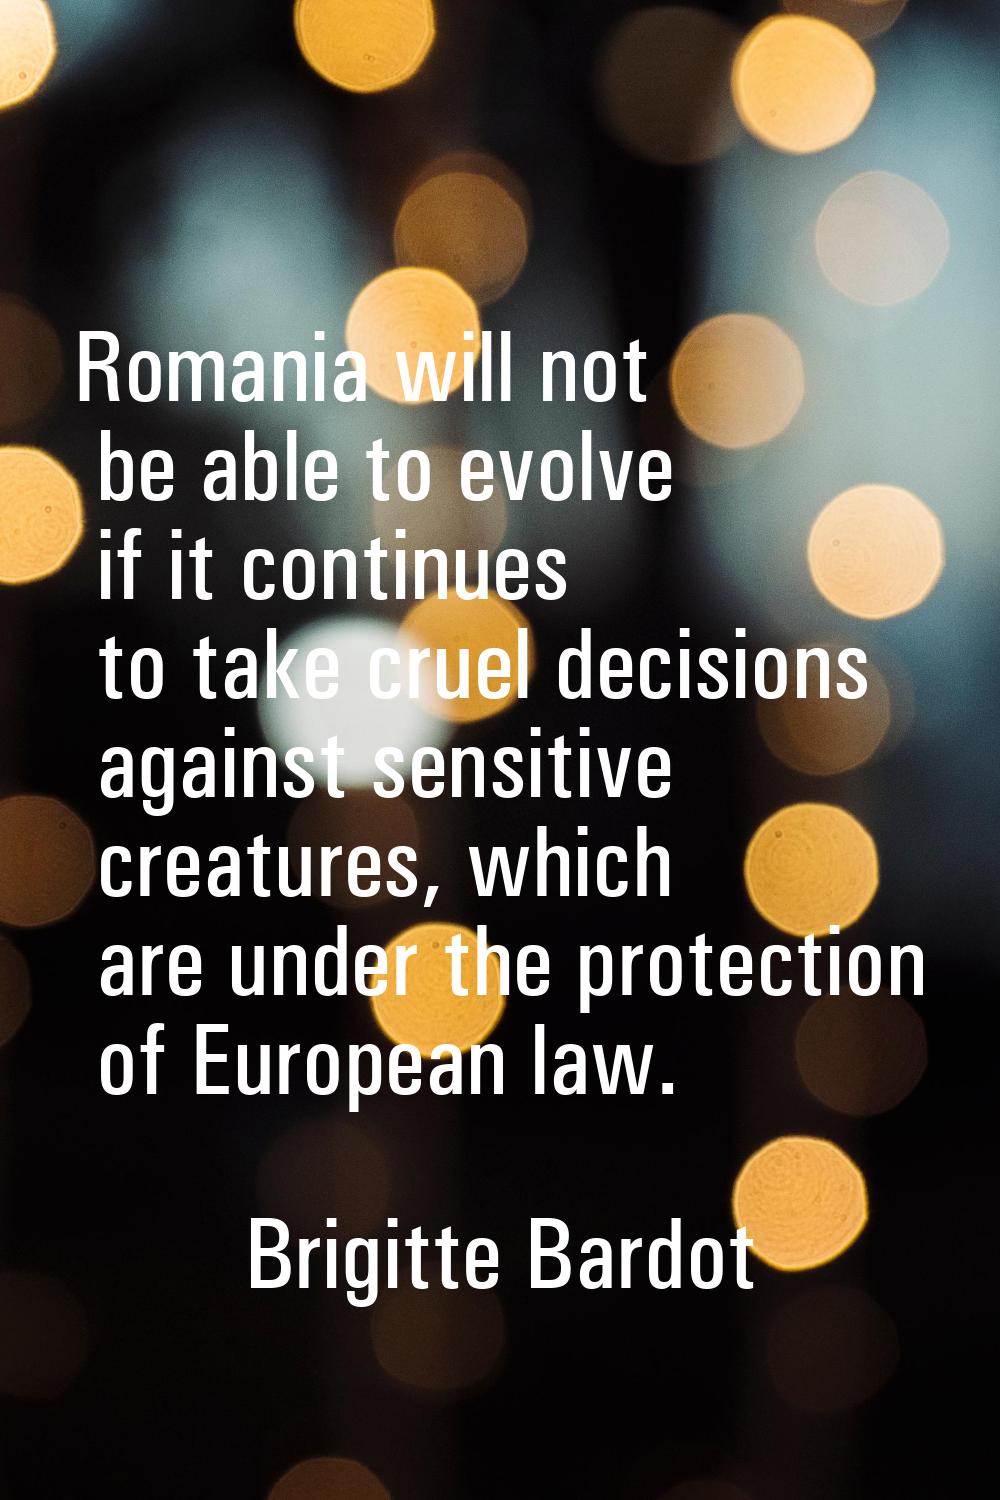 Romania will not be able to evolve if it continues to take cruel decisions against sensitive creatu